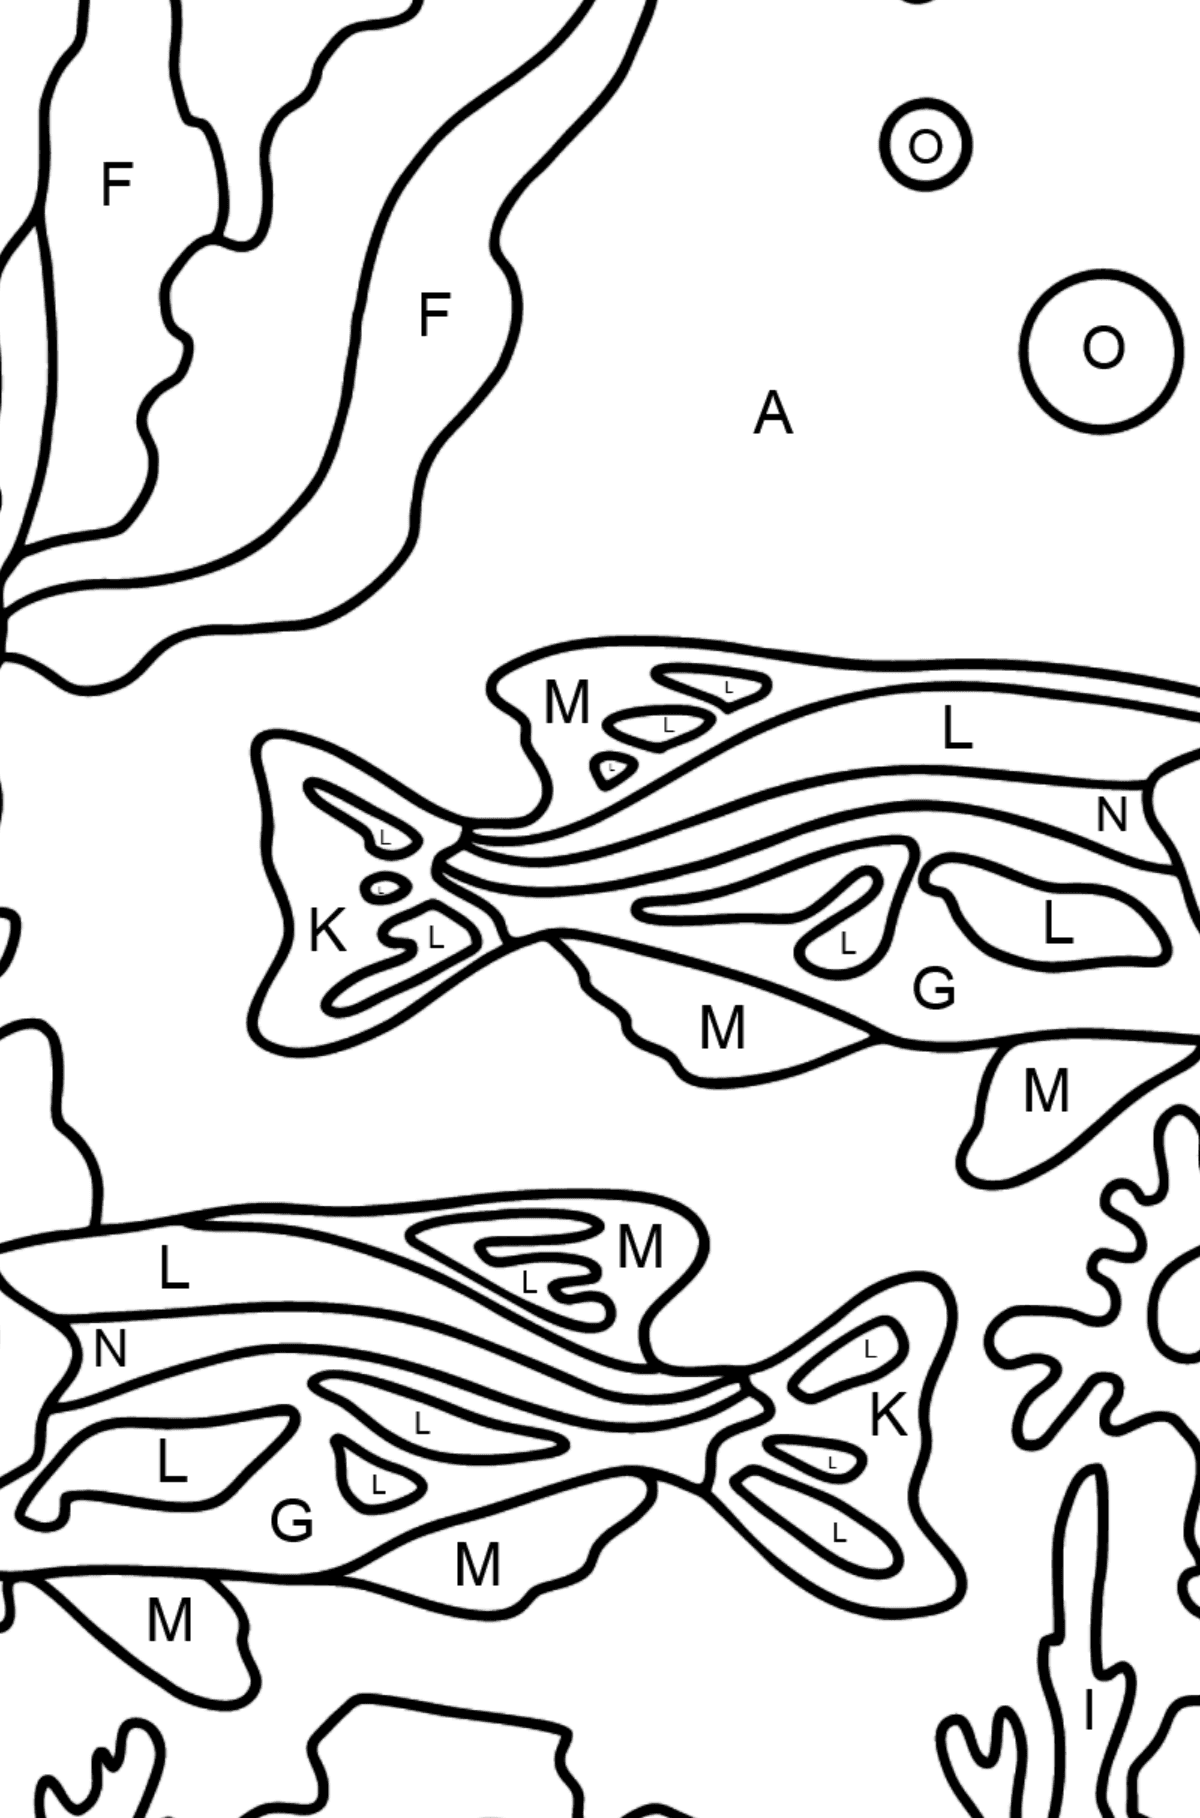 Two Fish Coloring Page - Fish are Swimming Beautifully - Coloring by Letters for Kids